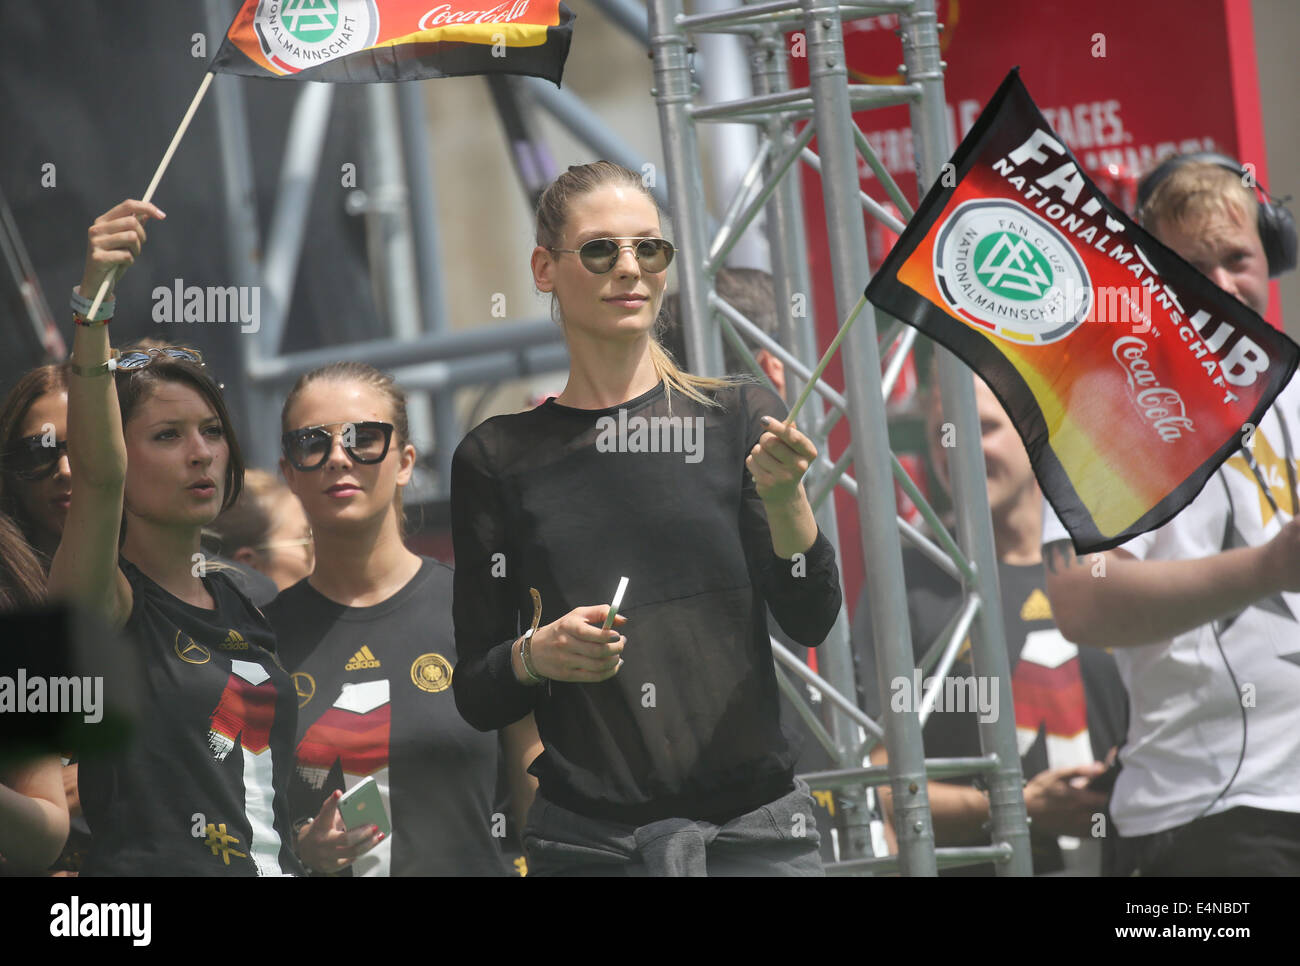 Berlin, Germany. 15th July, 2014. Girlfriend of Sebastian Schweinsteiger, Sara Brandner, holds a German flag at the so-called 'Fan Meile' at Brandenburg Gate in Berlin, Germany, 15 July 2014. The German team on 13 July 2014 had won the Brazil 2014 FIFA Soccer World Cup final against Argentina by 1-0 to win the title for the fourth time after 1954, 1974 and 1990. /Alamy Live News Stock Photo